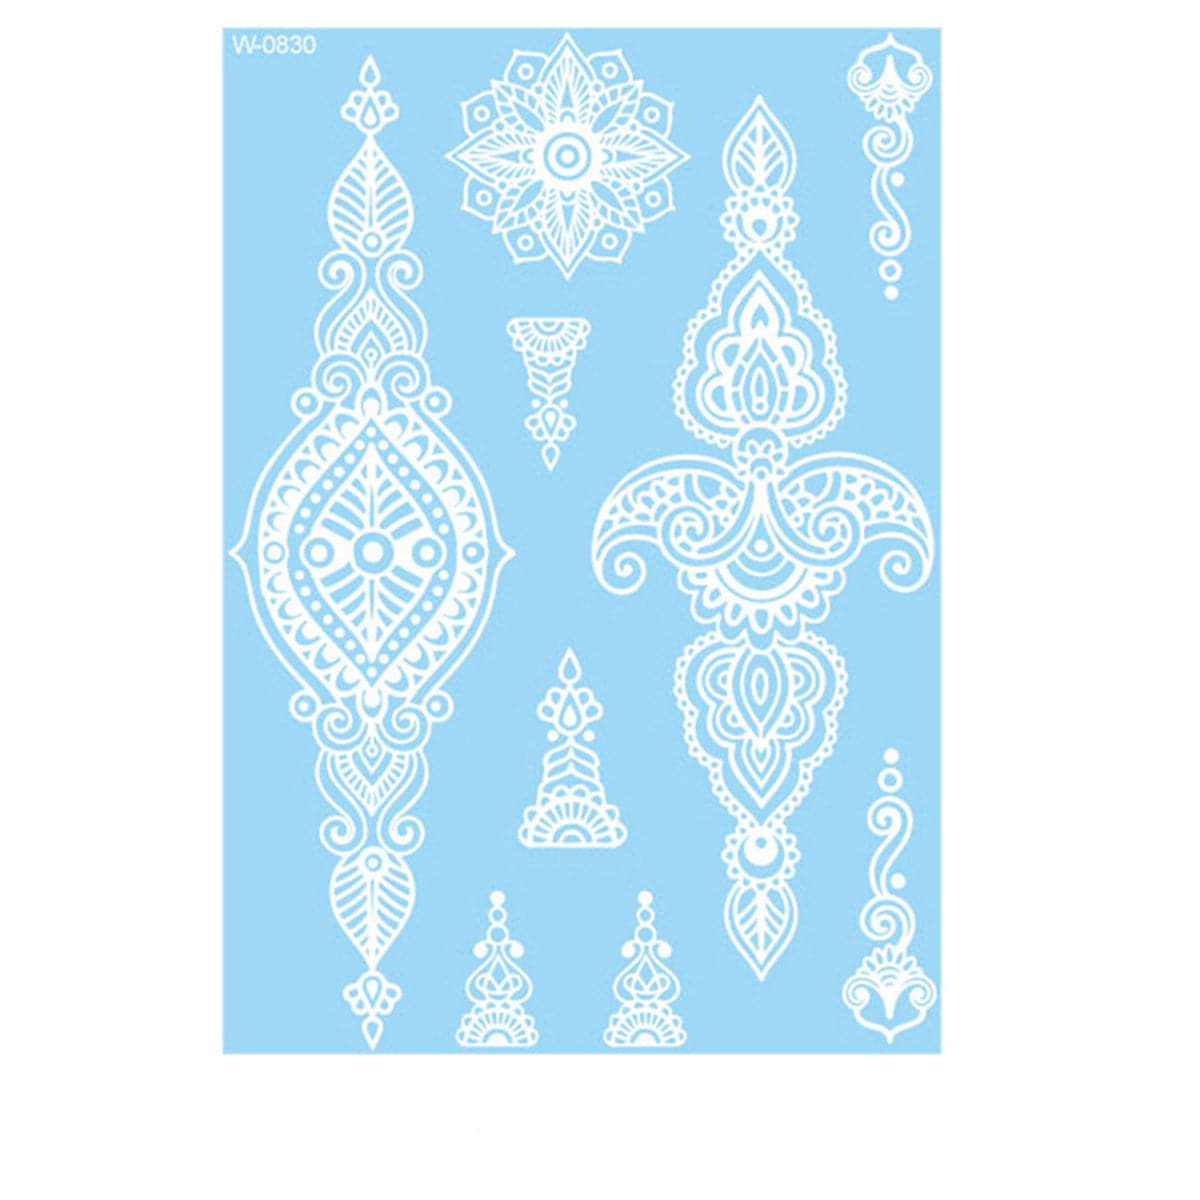 White Lace Paisley Floral Temporary Tattoo Set - 5 Pcs